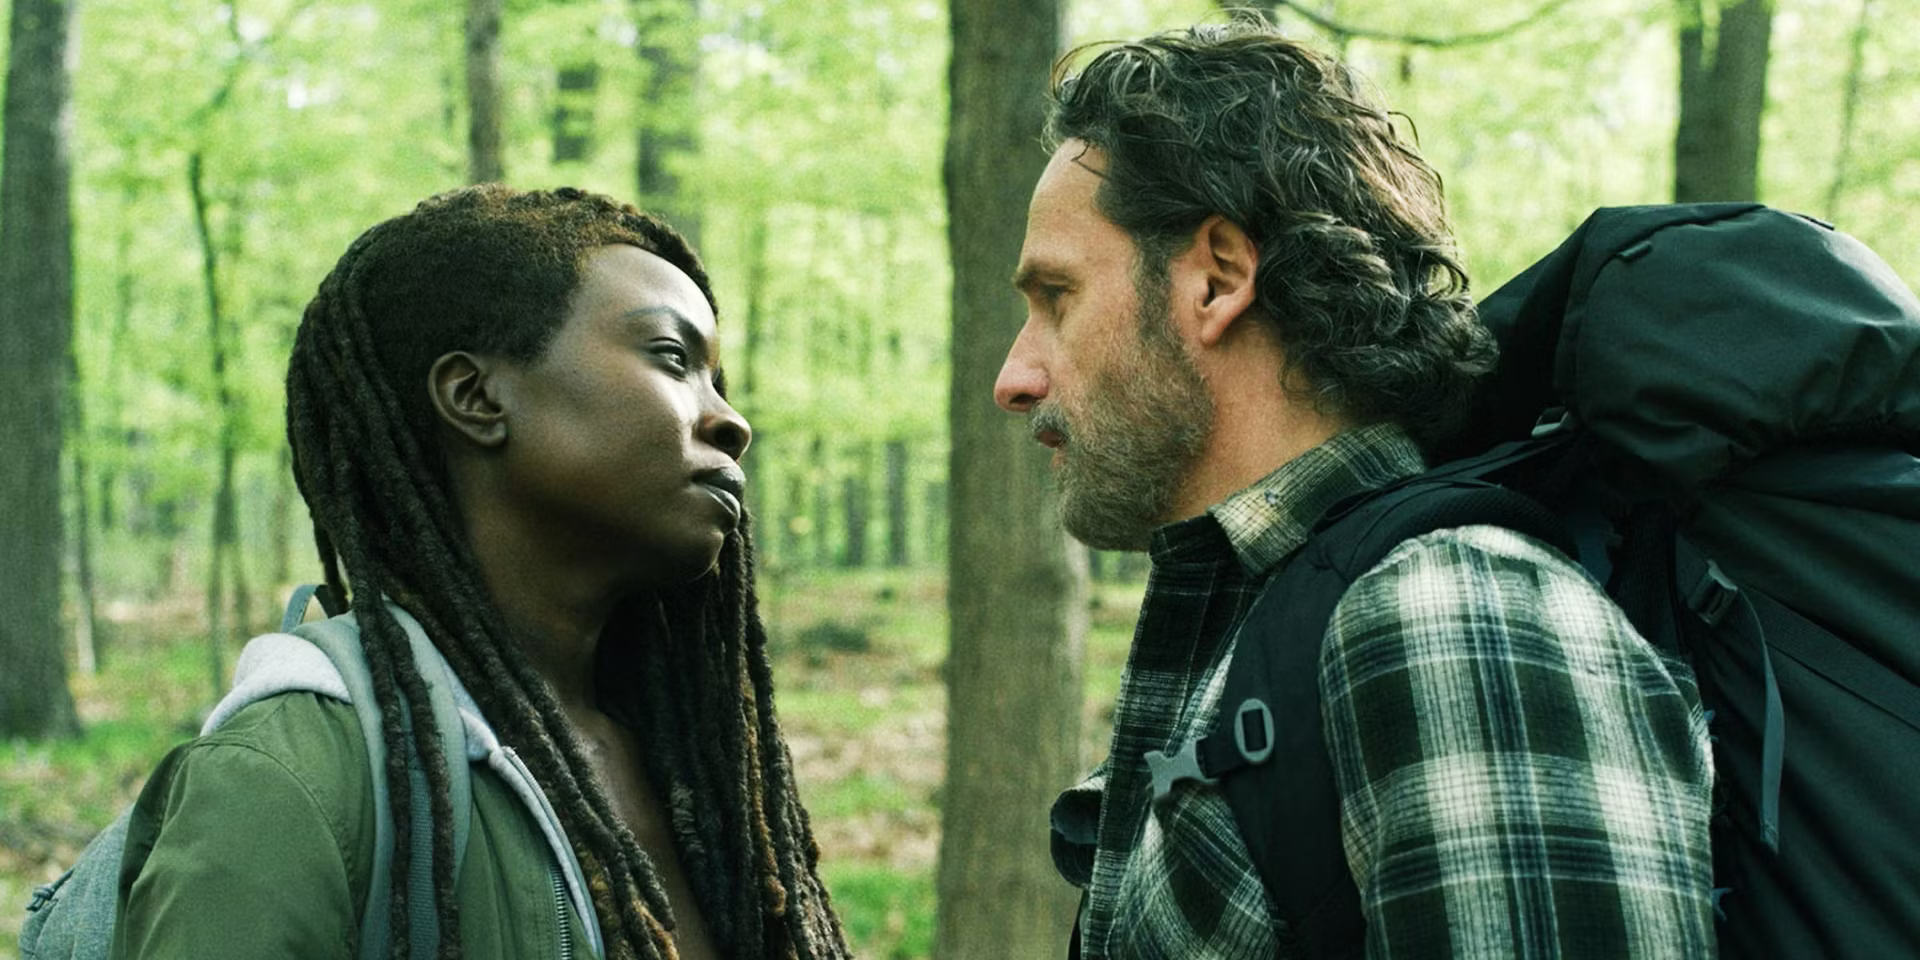 Review: ‘The Walking Dead: The Ones Who Live’ Season 1, Episode 5 "Become"